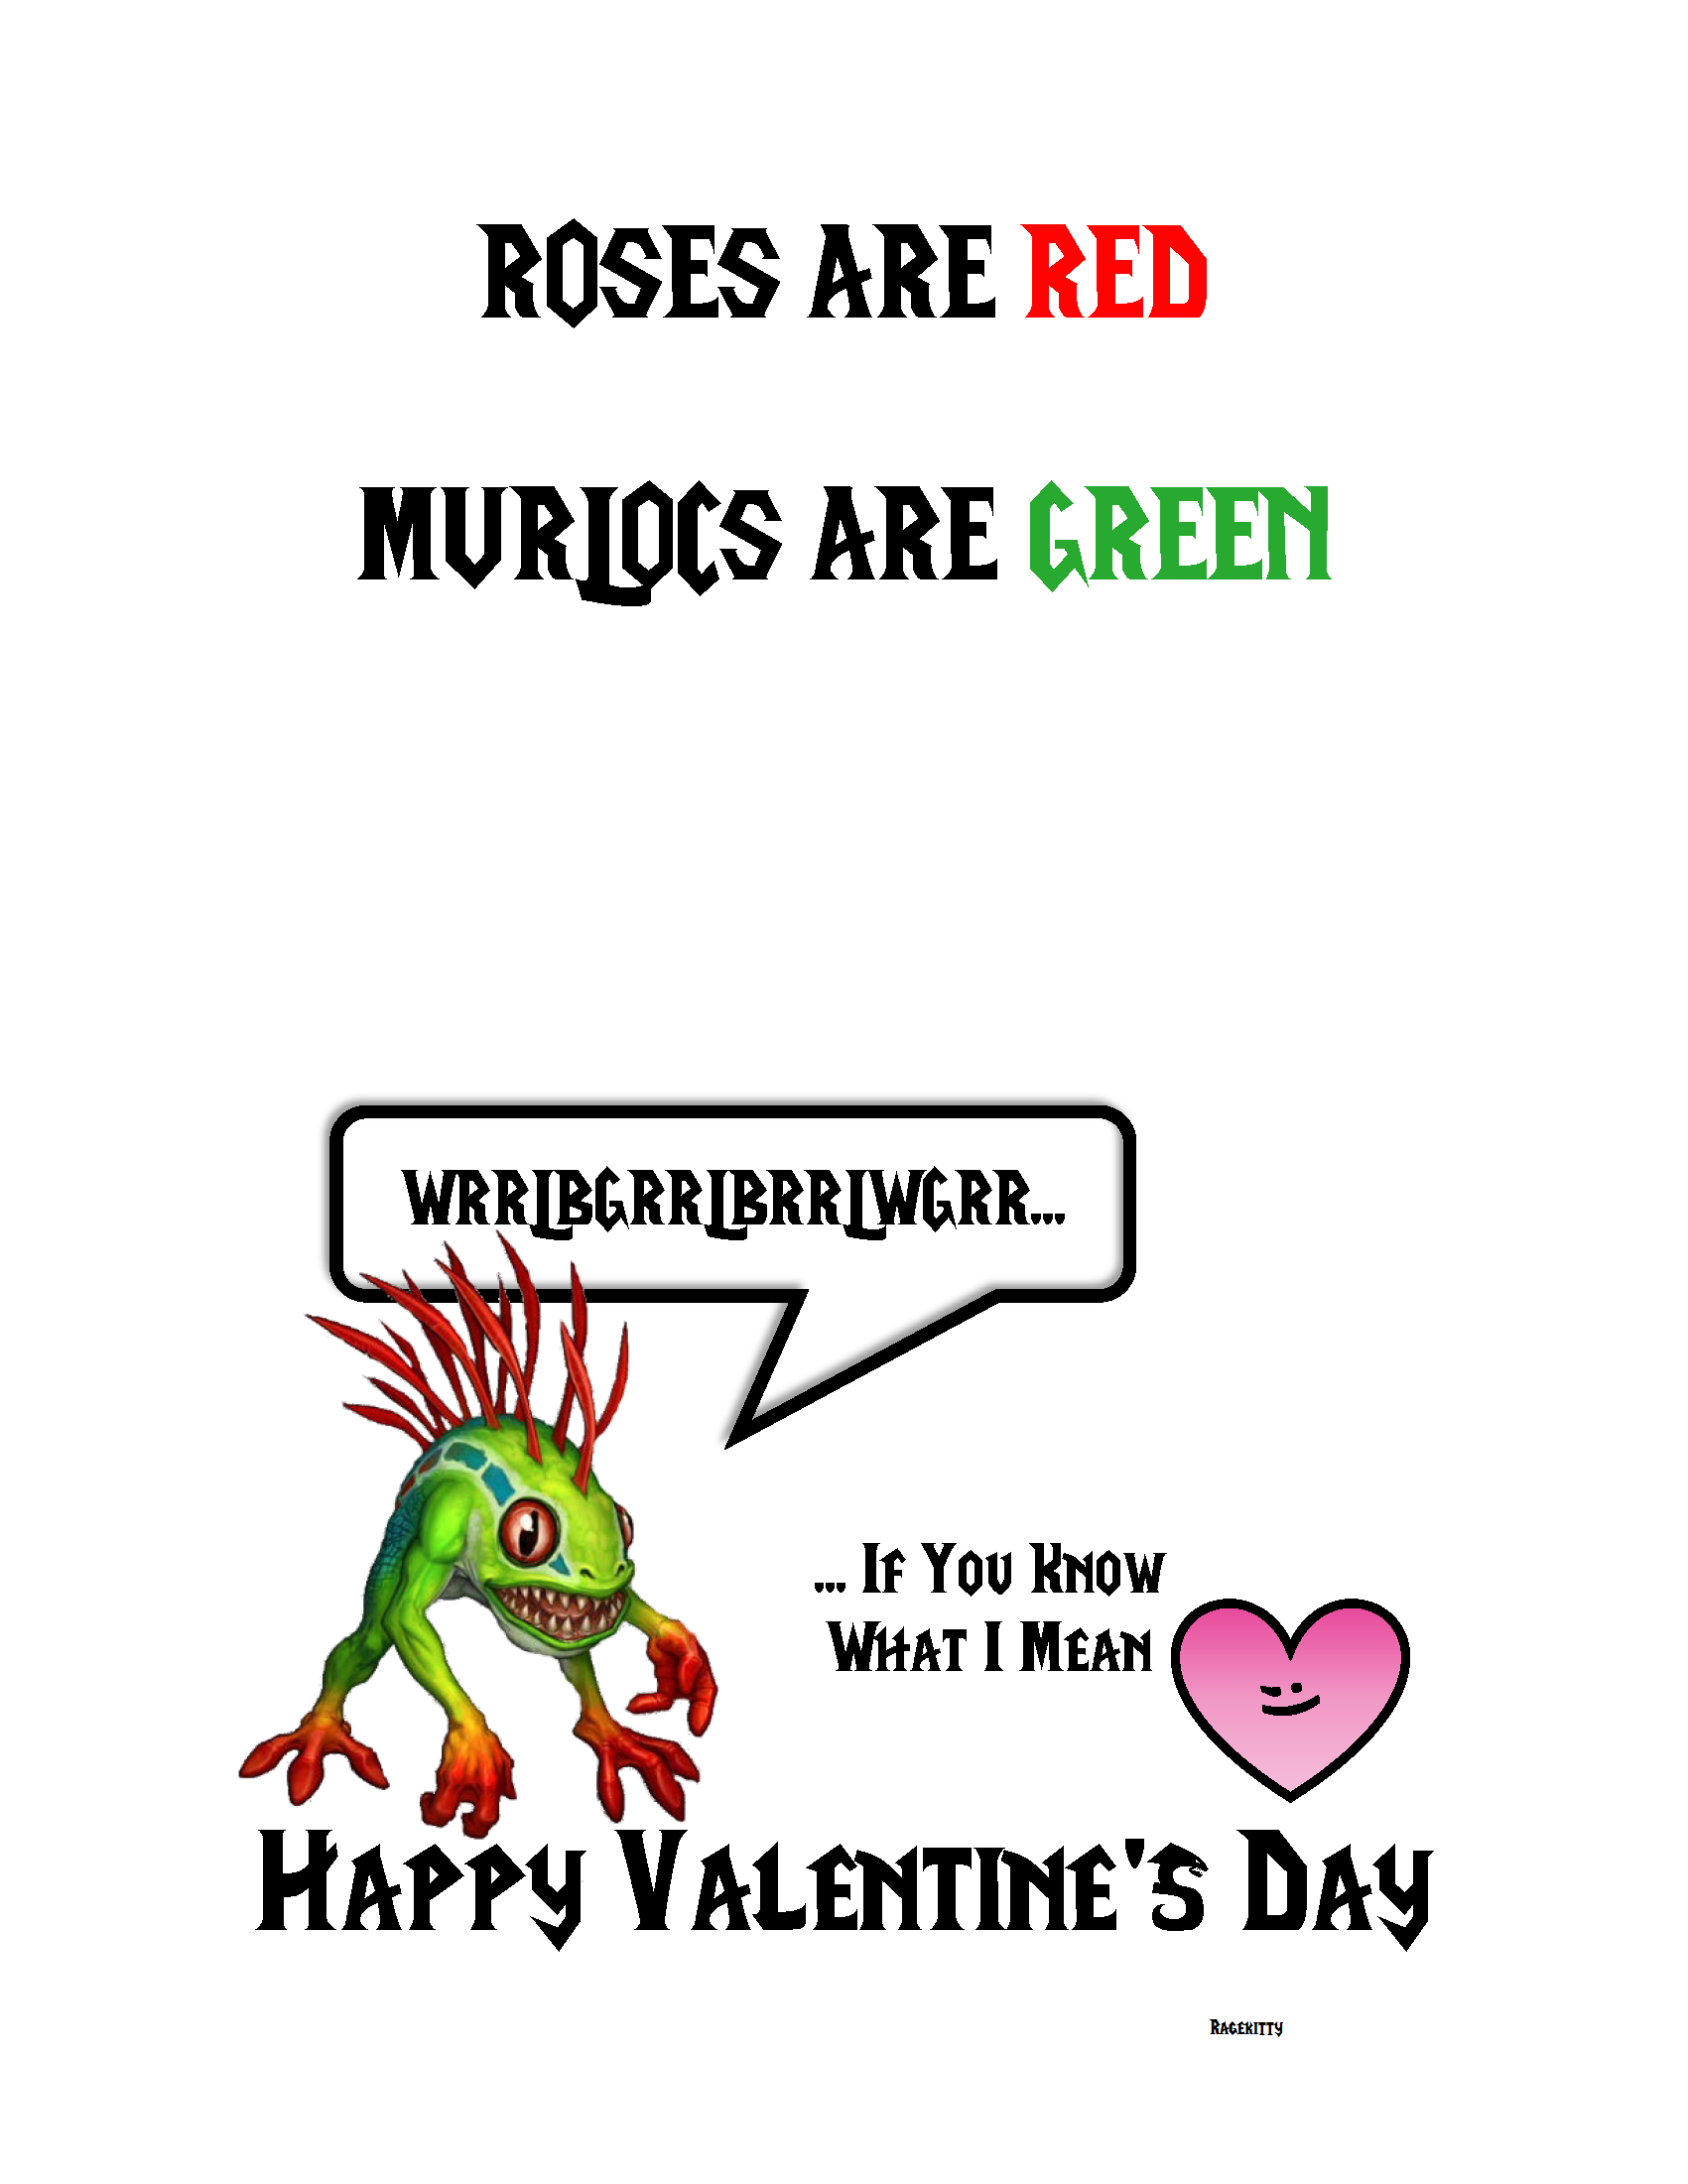 happy valentines day wow - Roses Are Red Murjocs Are Green WrrlbgrrBrrlwgrr... ... If You Know What I Mean Happy Valentine'S Day Ragekitty